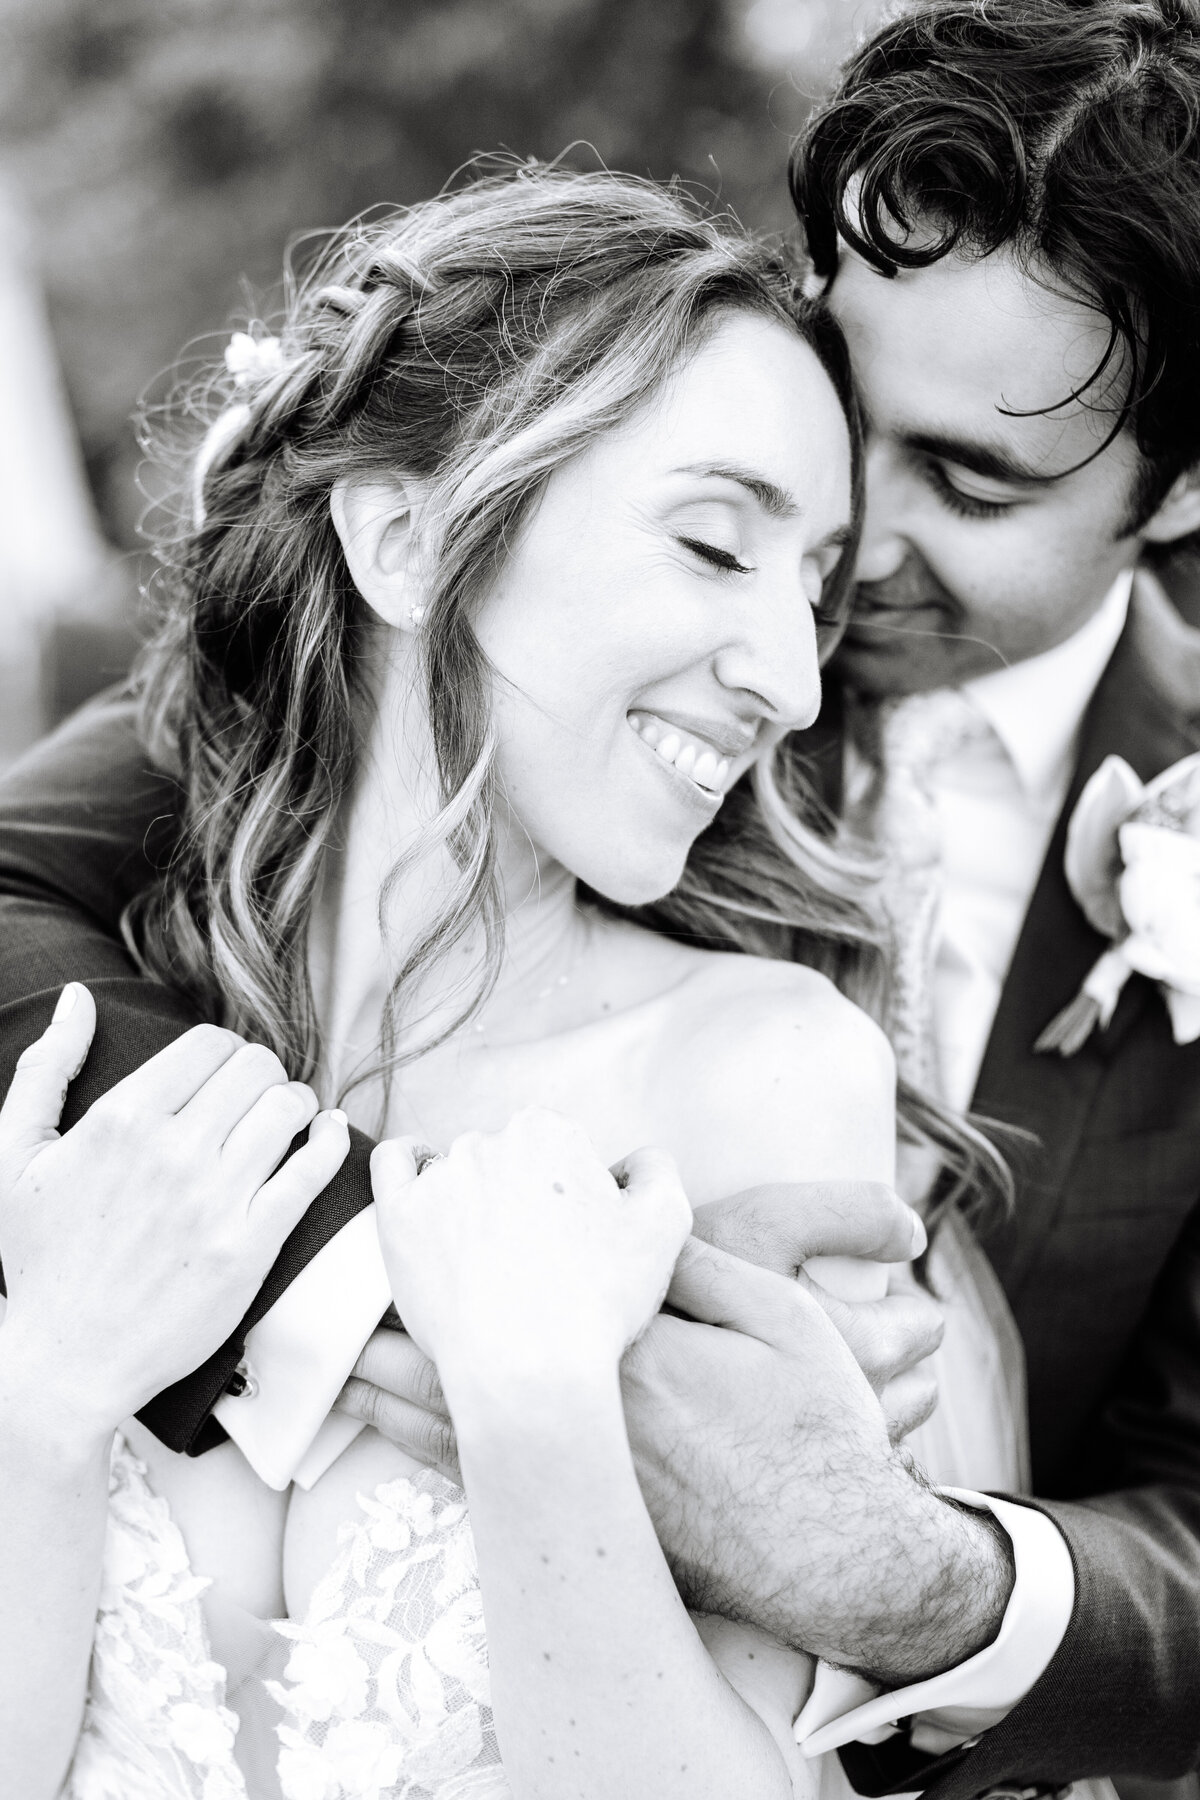 black and white close up image of sonoma county bride and groom smiling and embracing.